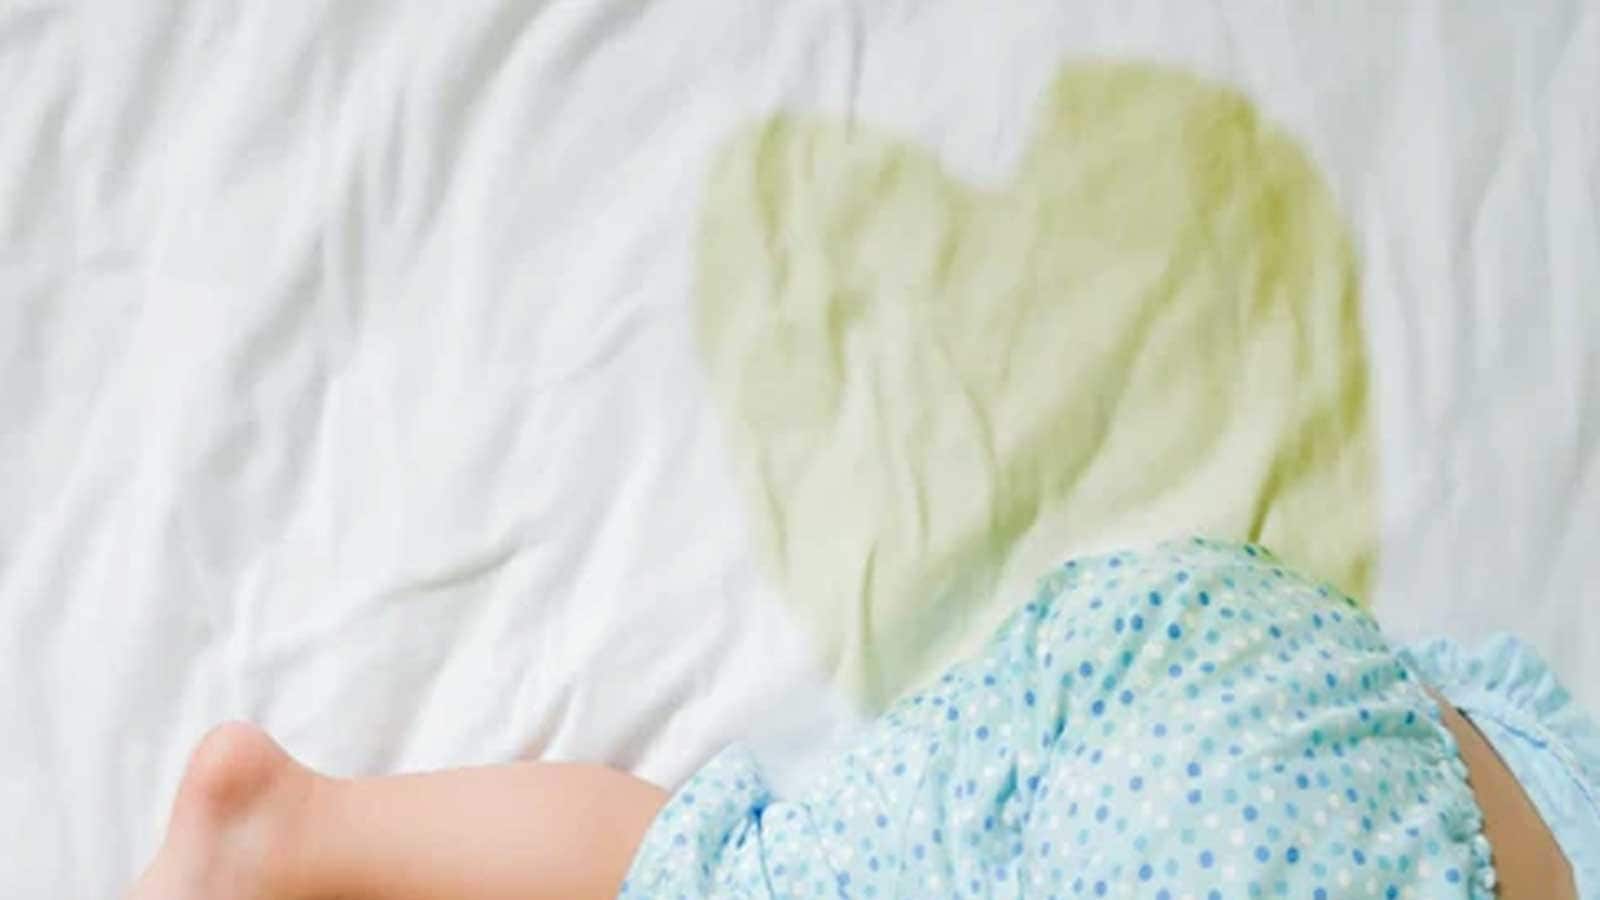 Bedwetting In Older Children: Why Does It Happen And What Can You Do To Stop It?